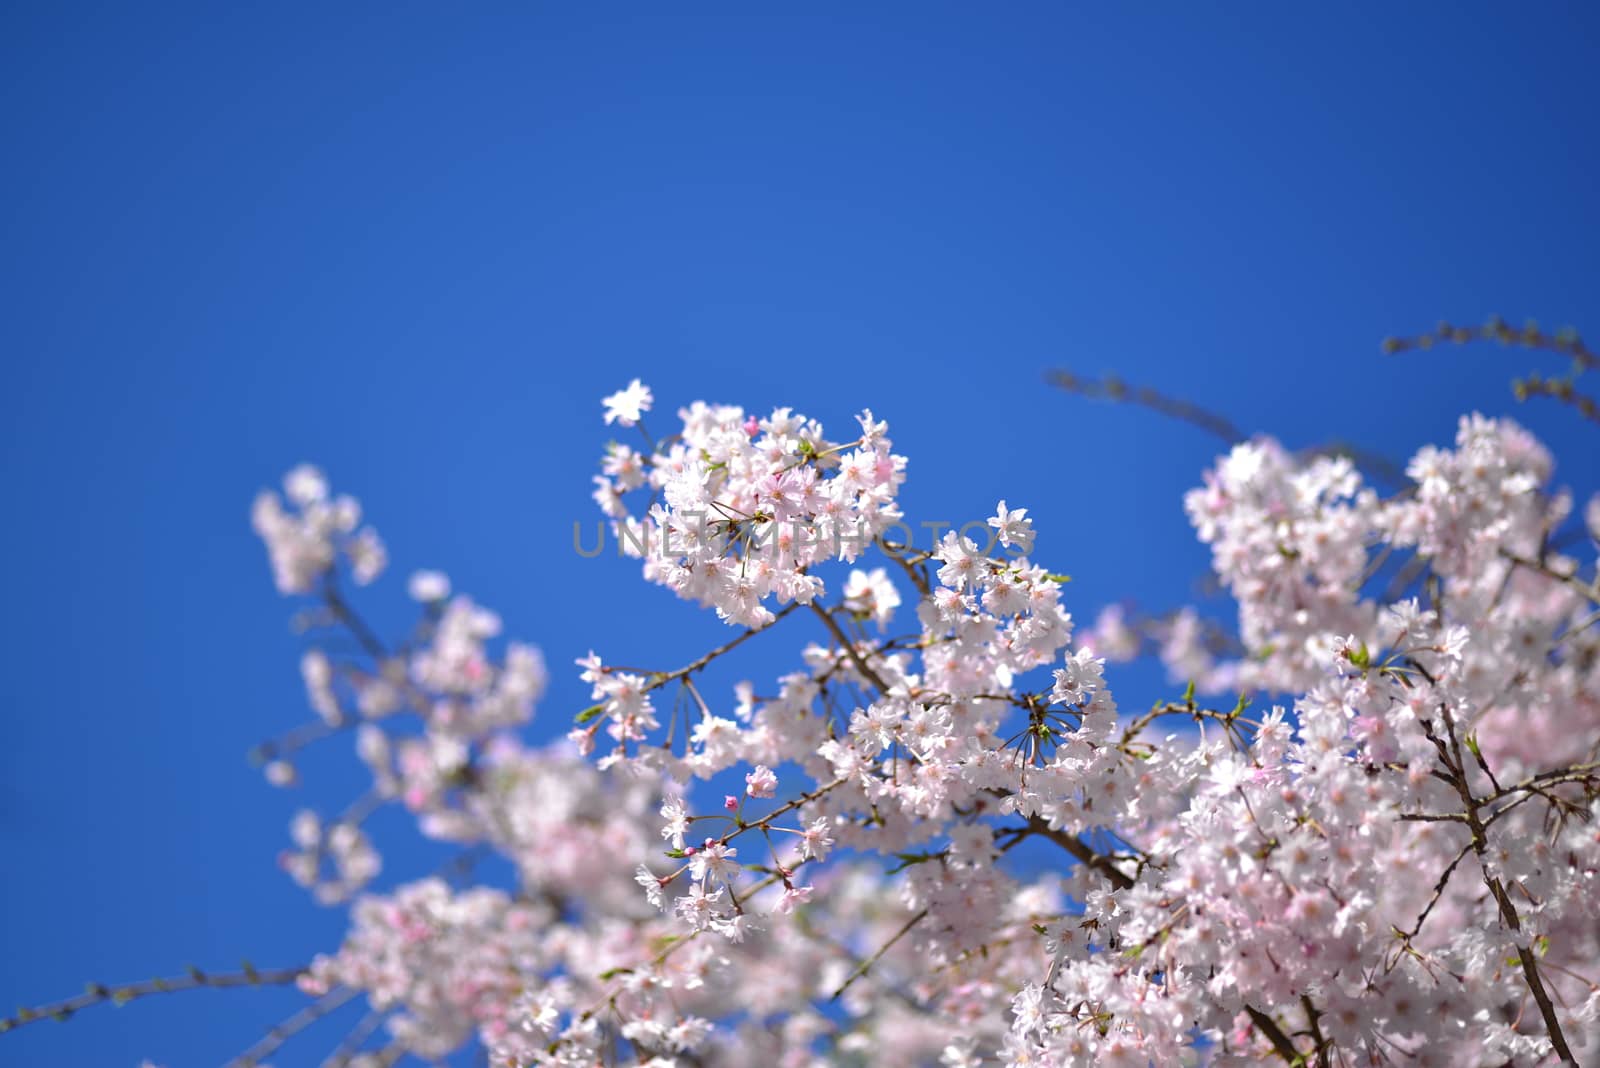 Cherry Blossom in Spring by nikonite